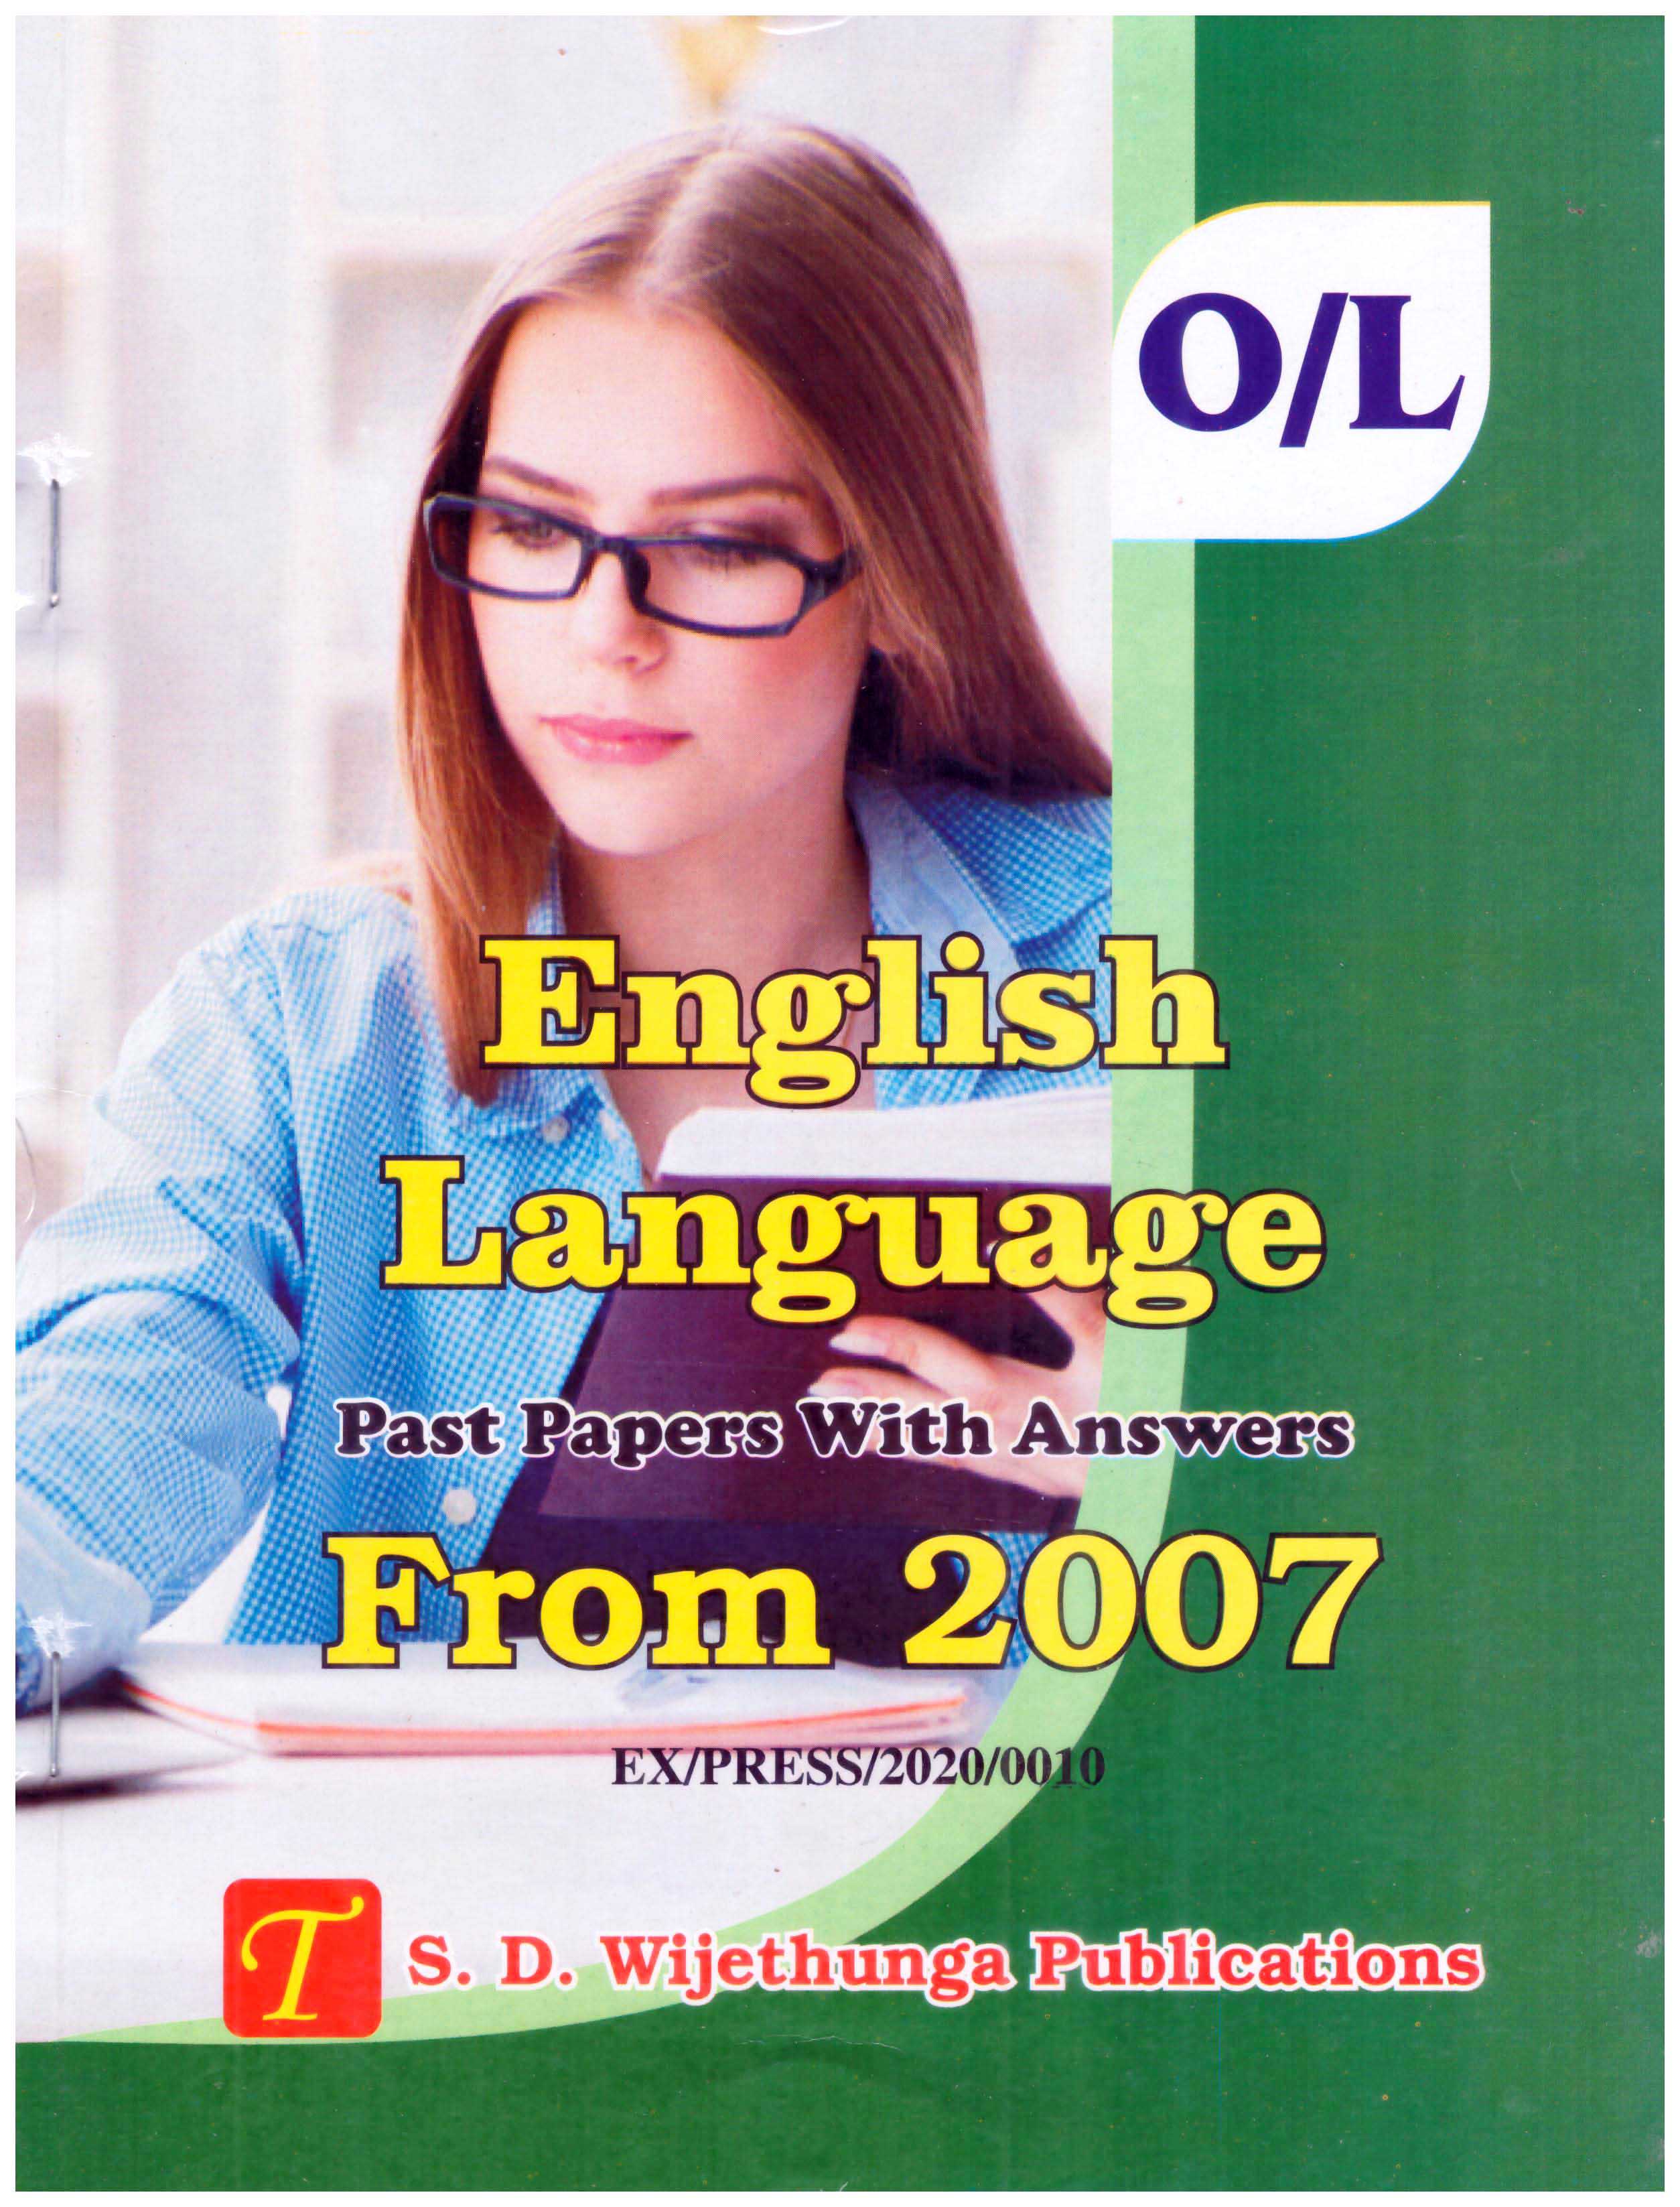 O/L English Language Past Papers With Answers From 2007-200